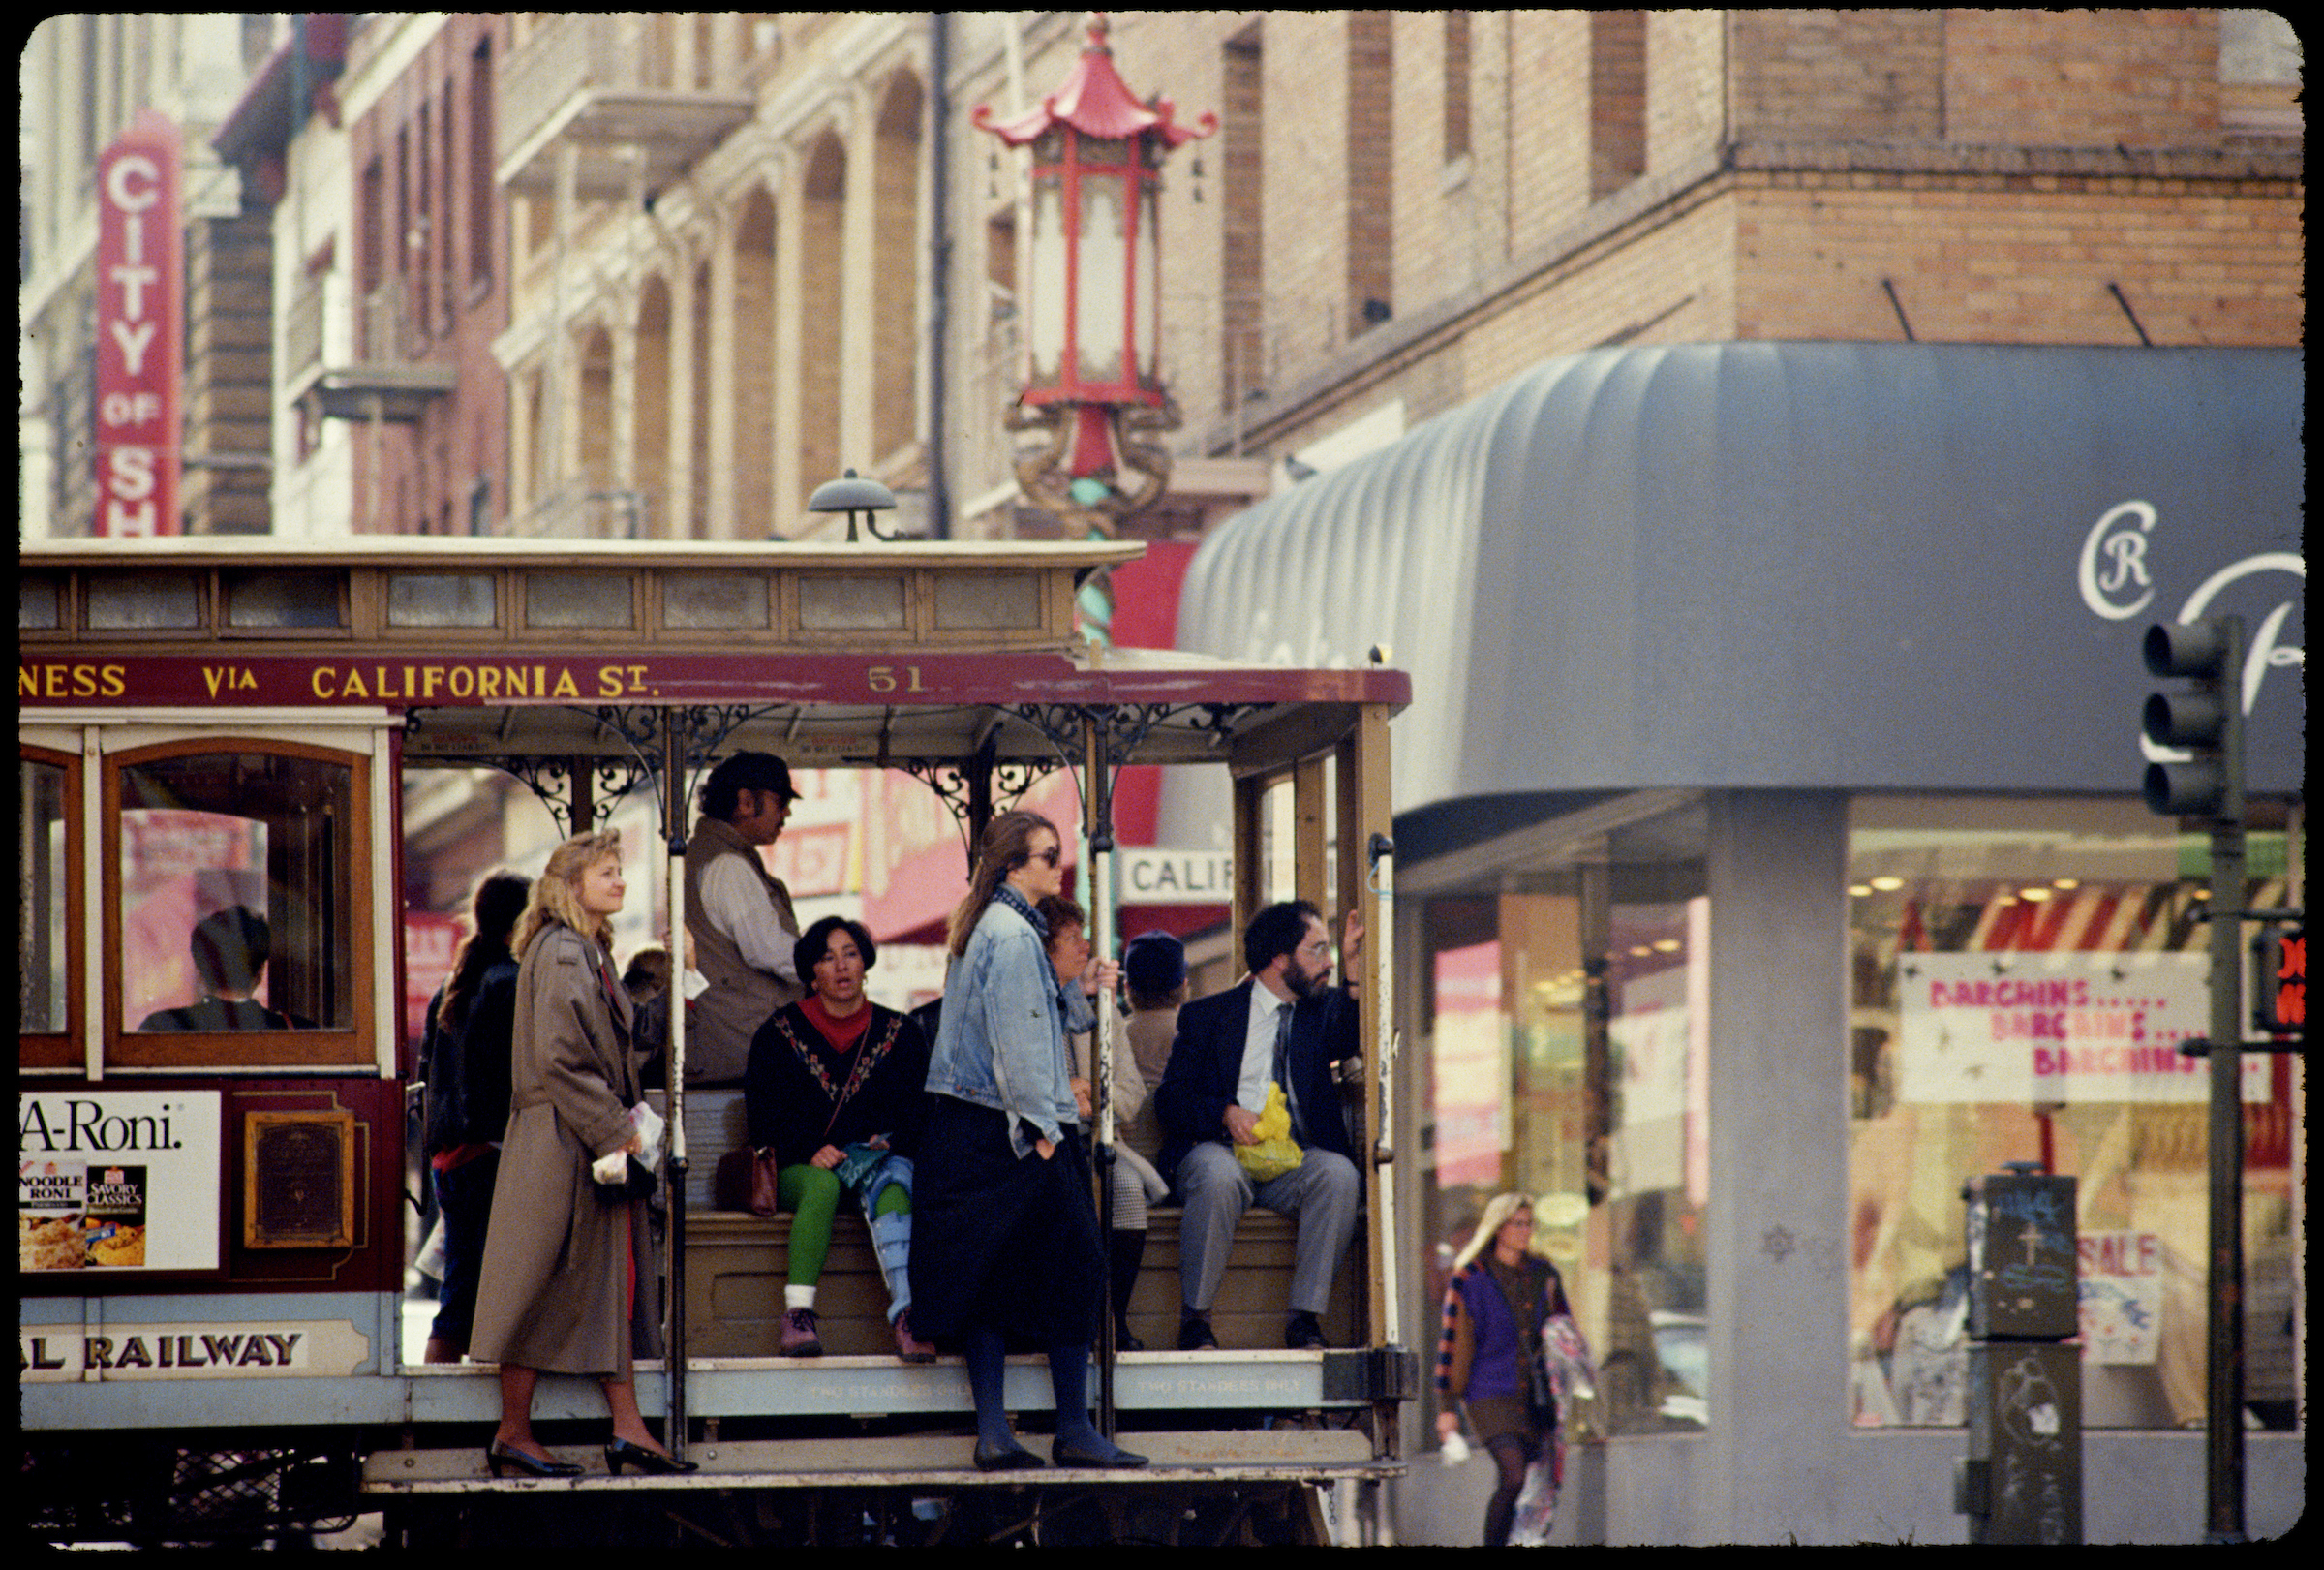 A picture shows a San Francisco street with a cable car going down it with people on the running boards.